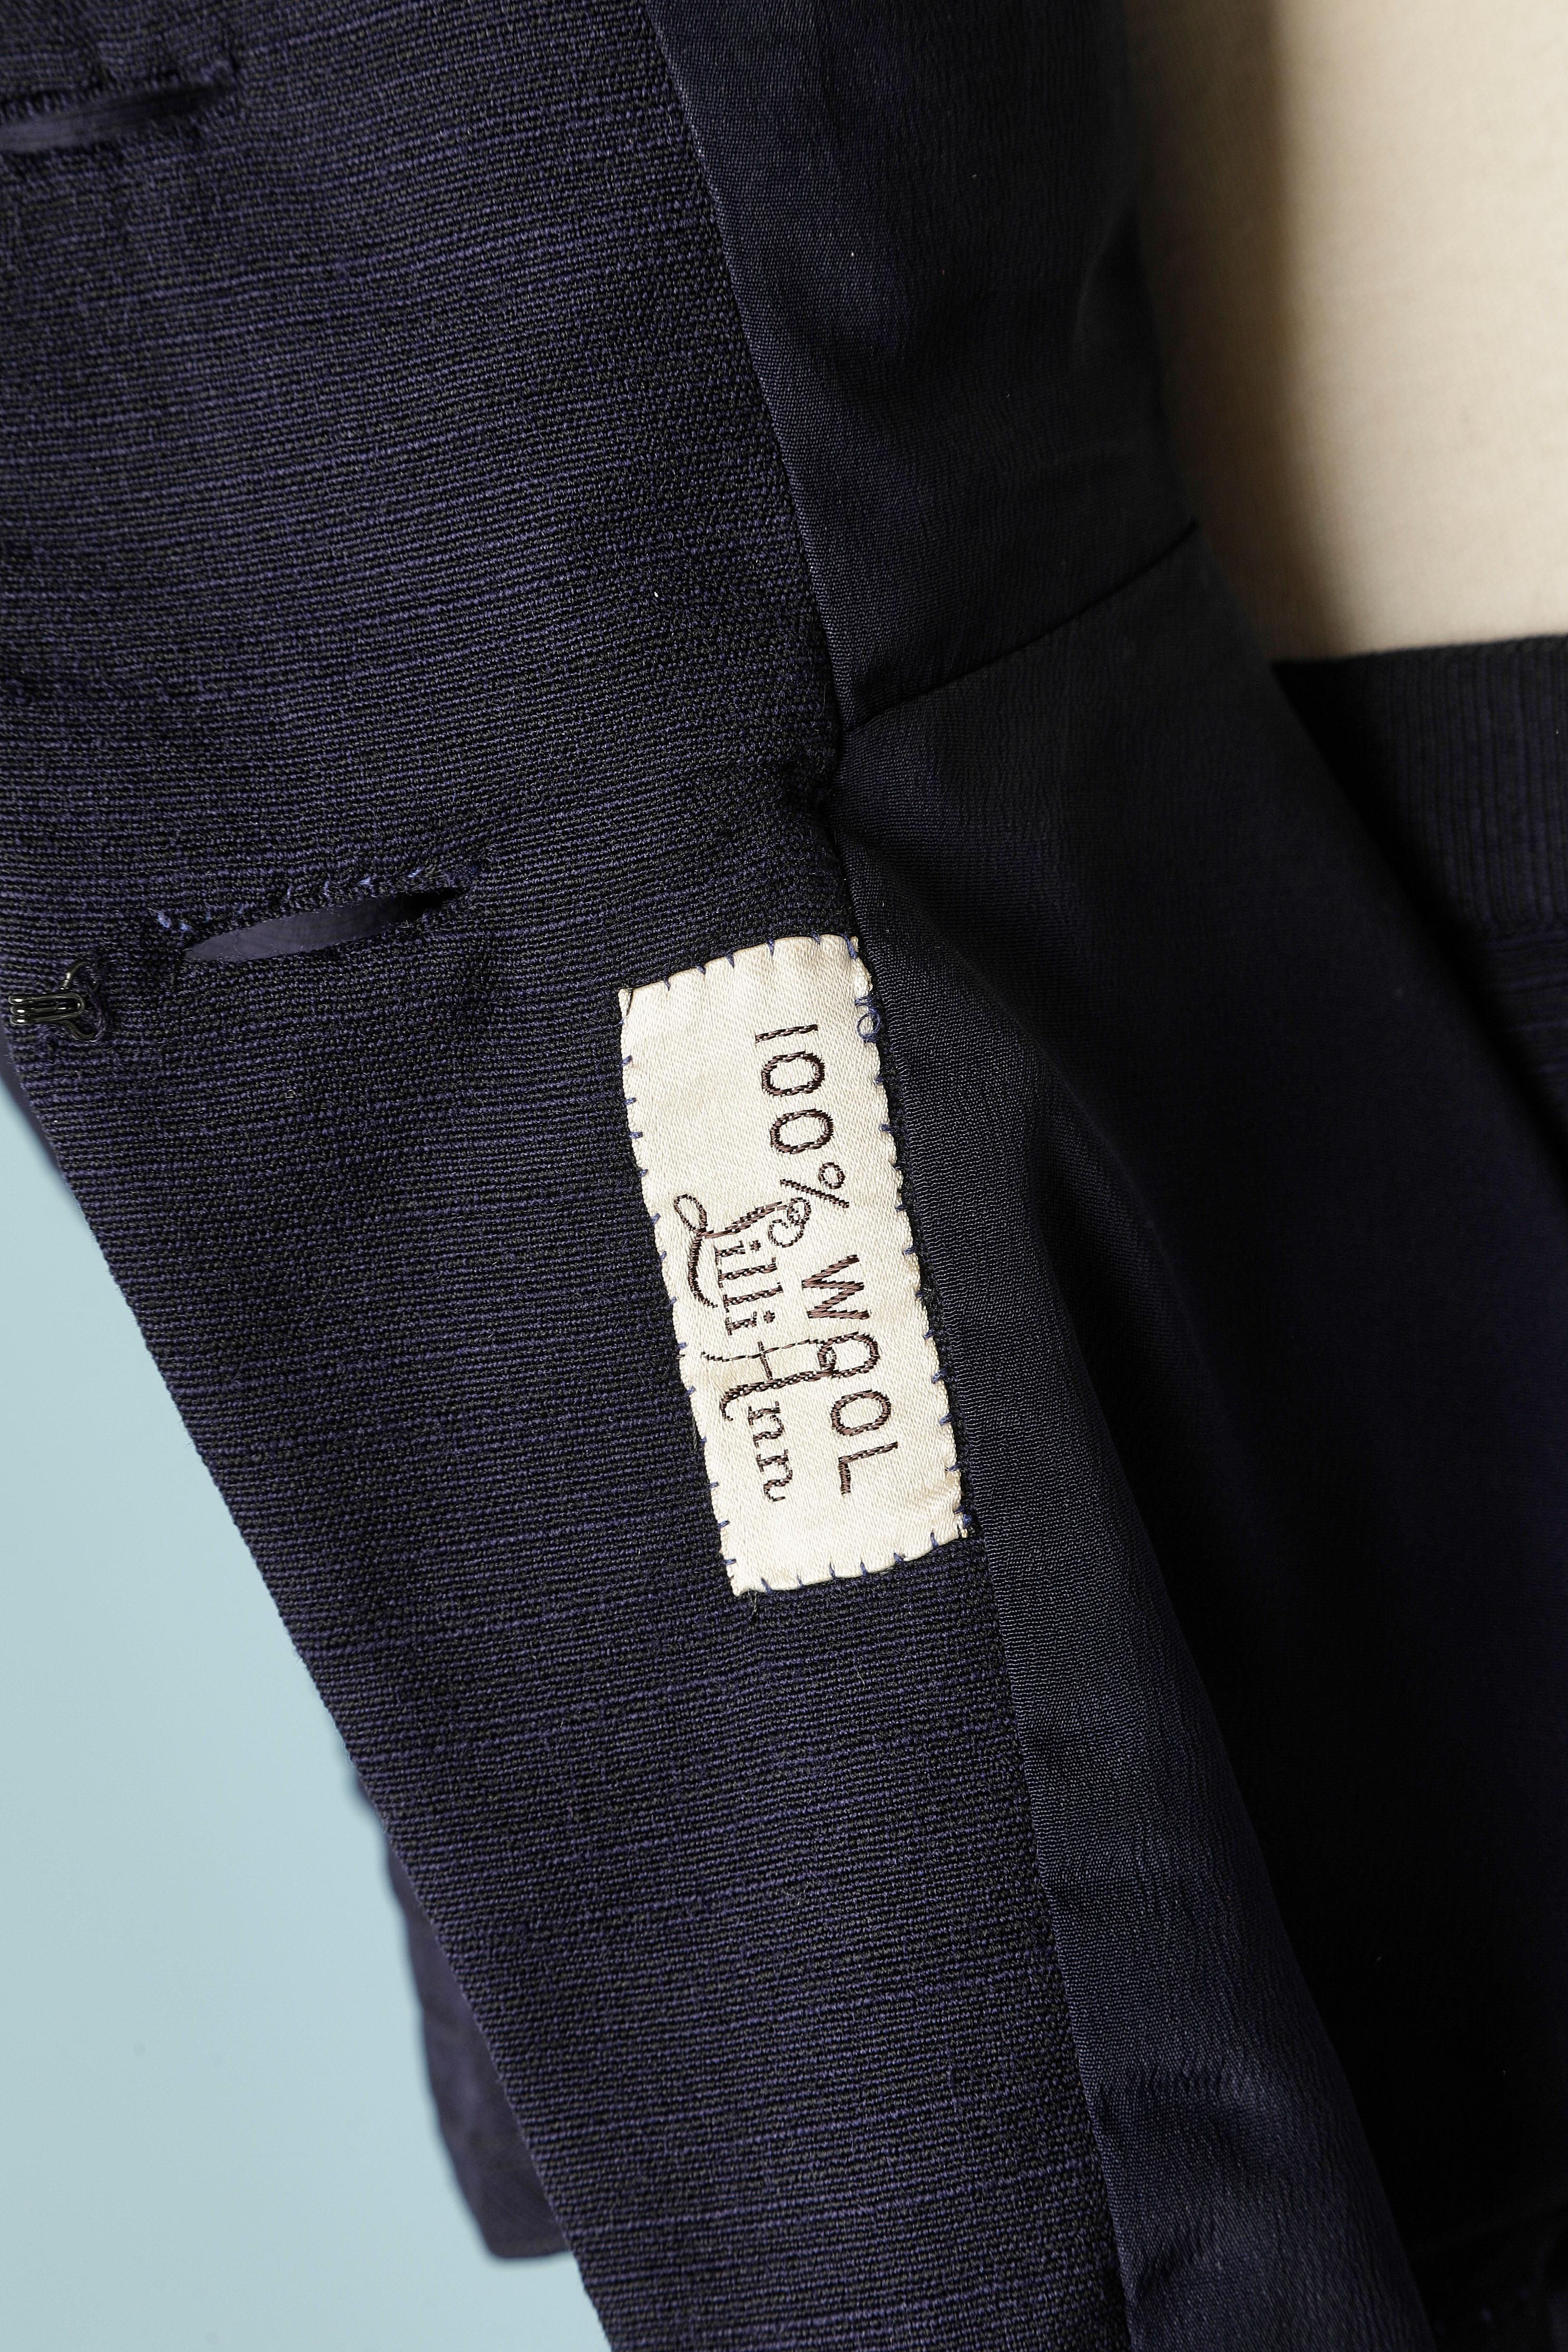 Navy blue wool skirt suit with top-stitching Lilli Ann Circa 1940 For Sale 4